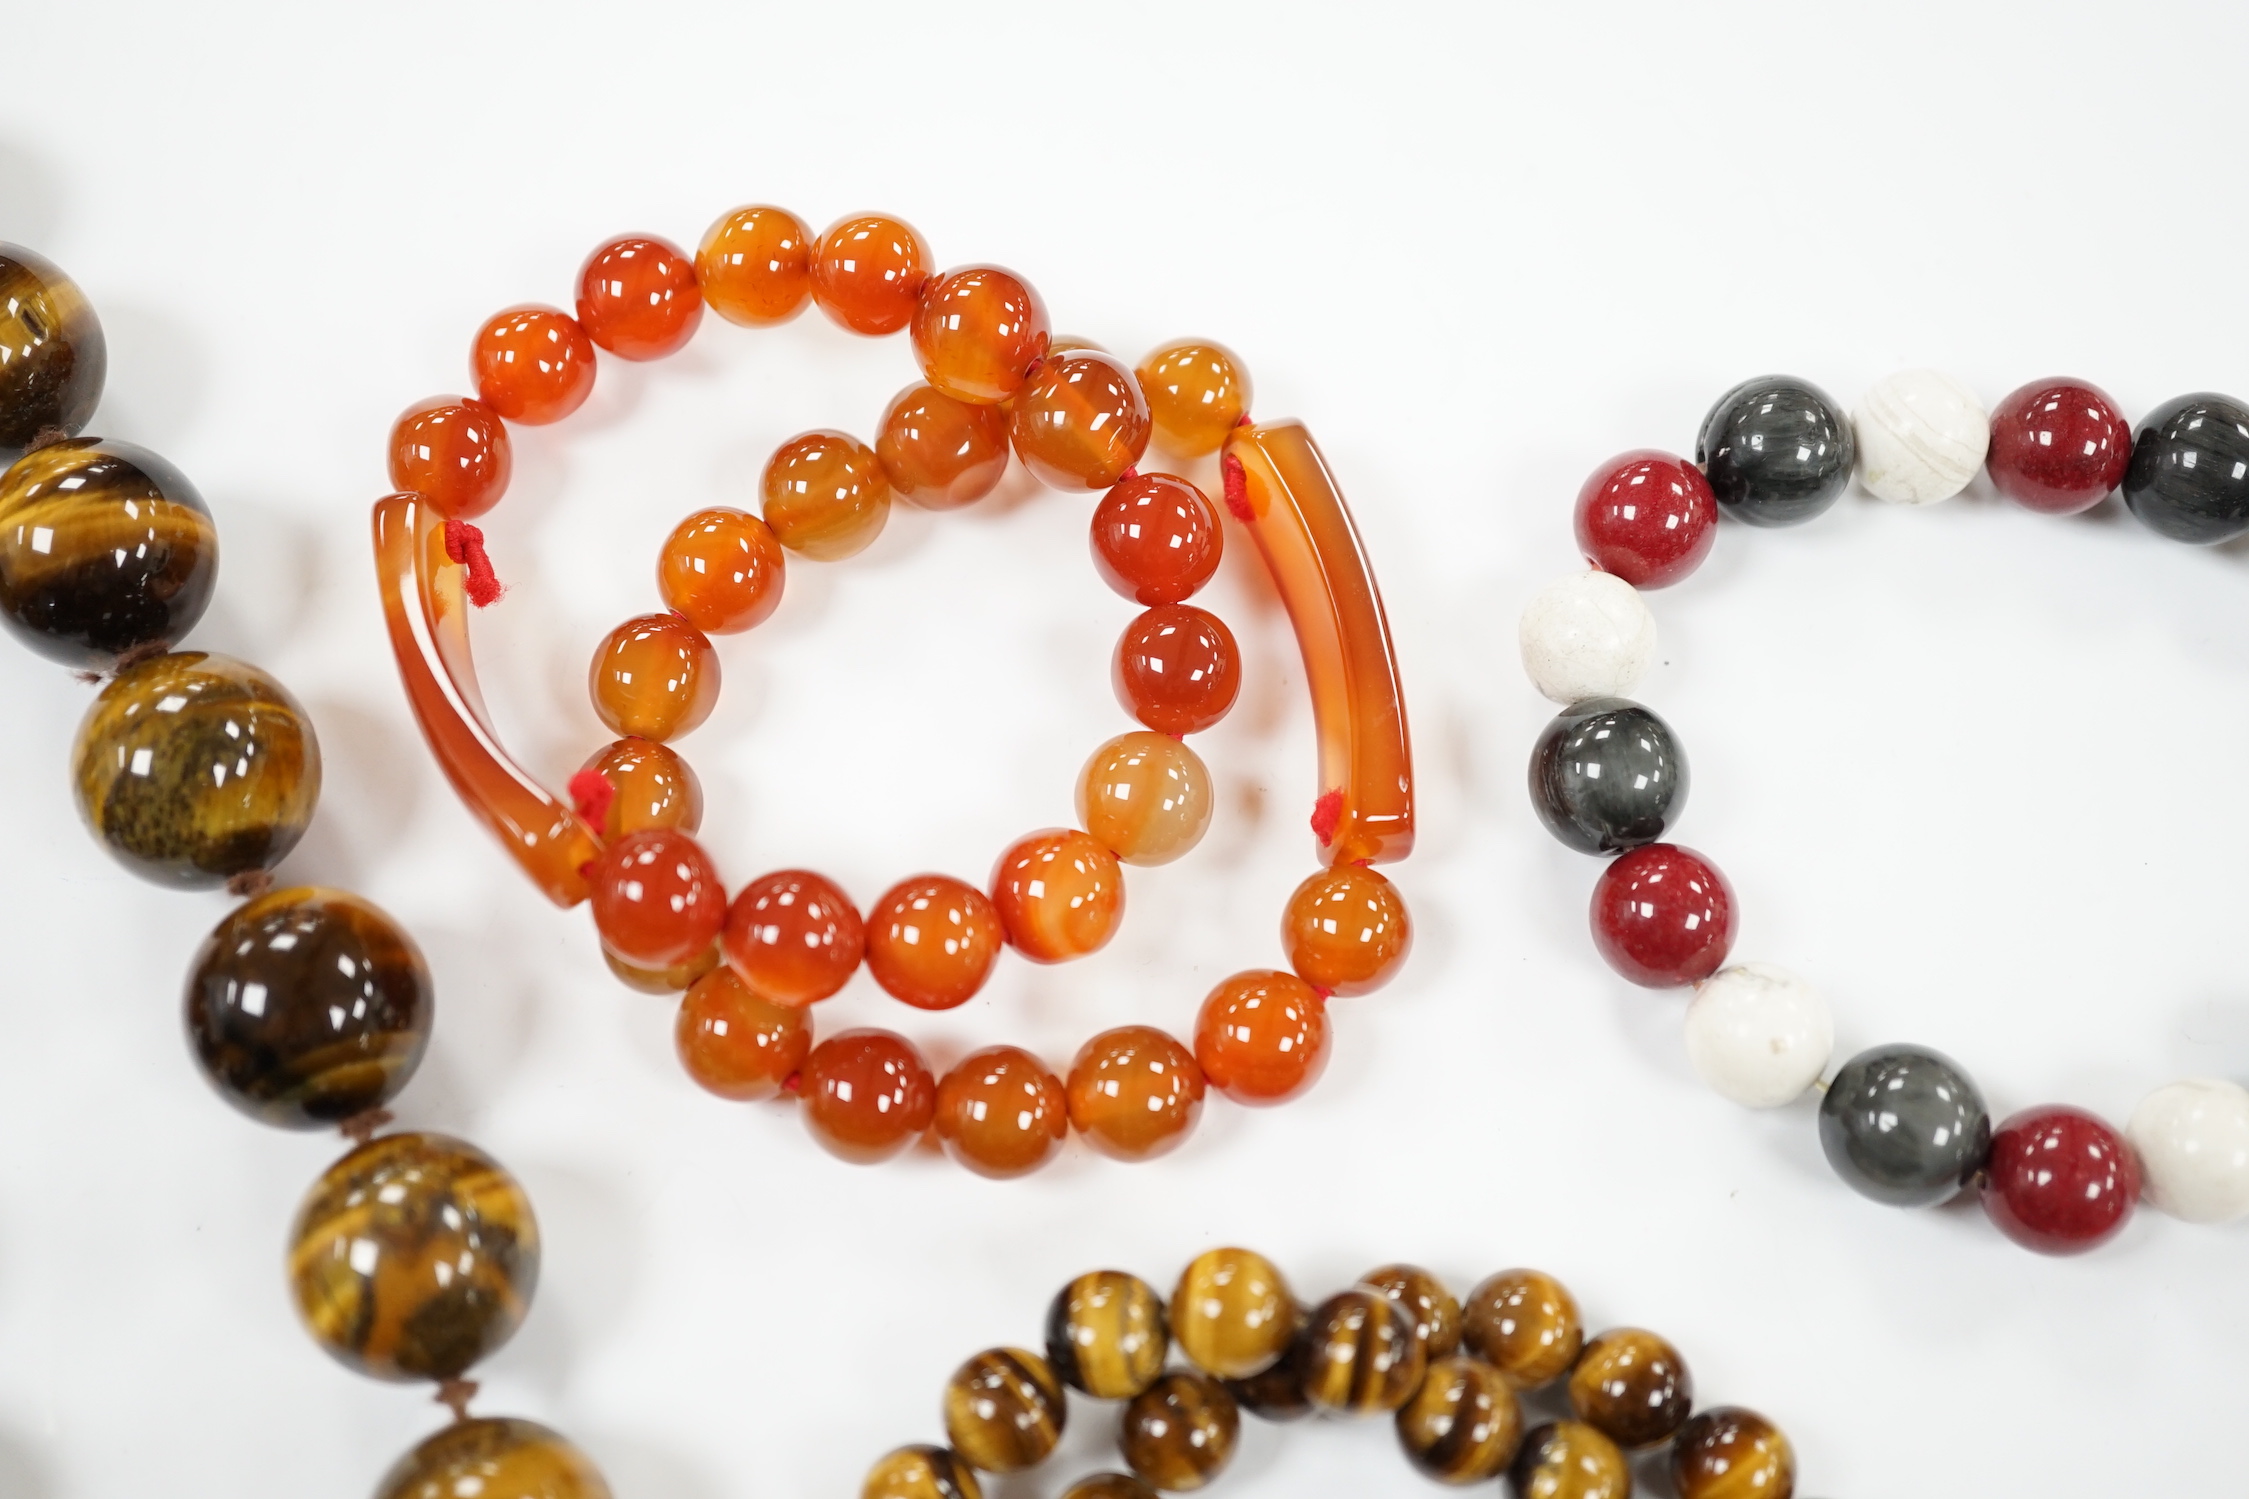 A tiger's eye quartz bead necklace, 44cm and two tiger's eye quartz bracelets, together with other bracelets including agate and loose beads.